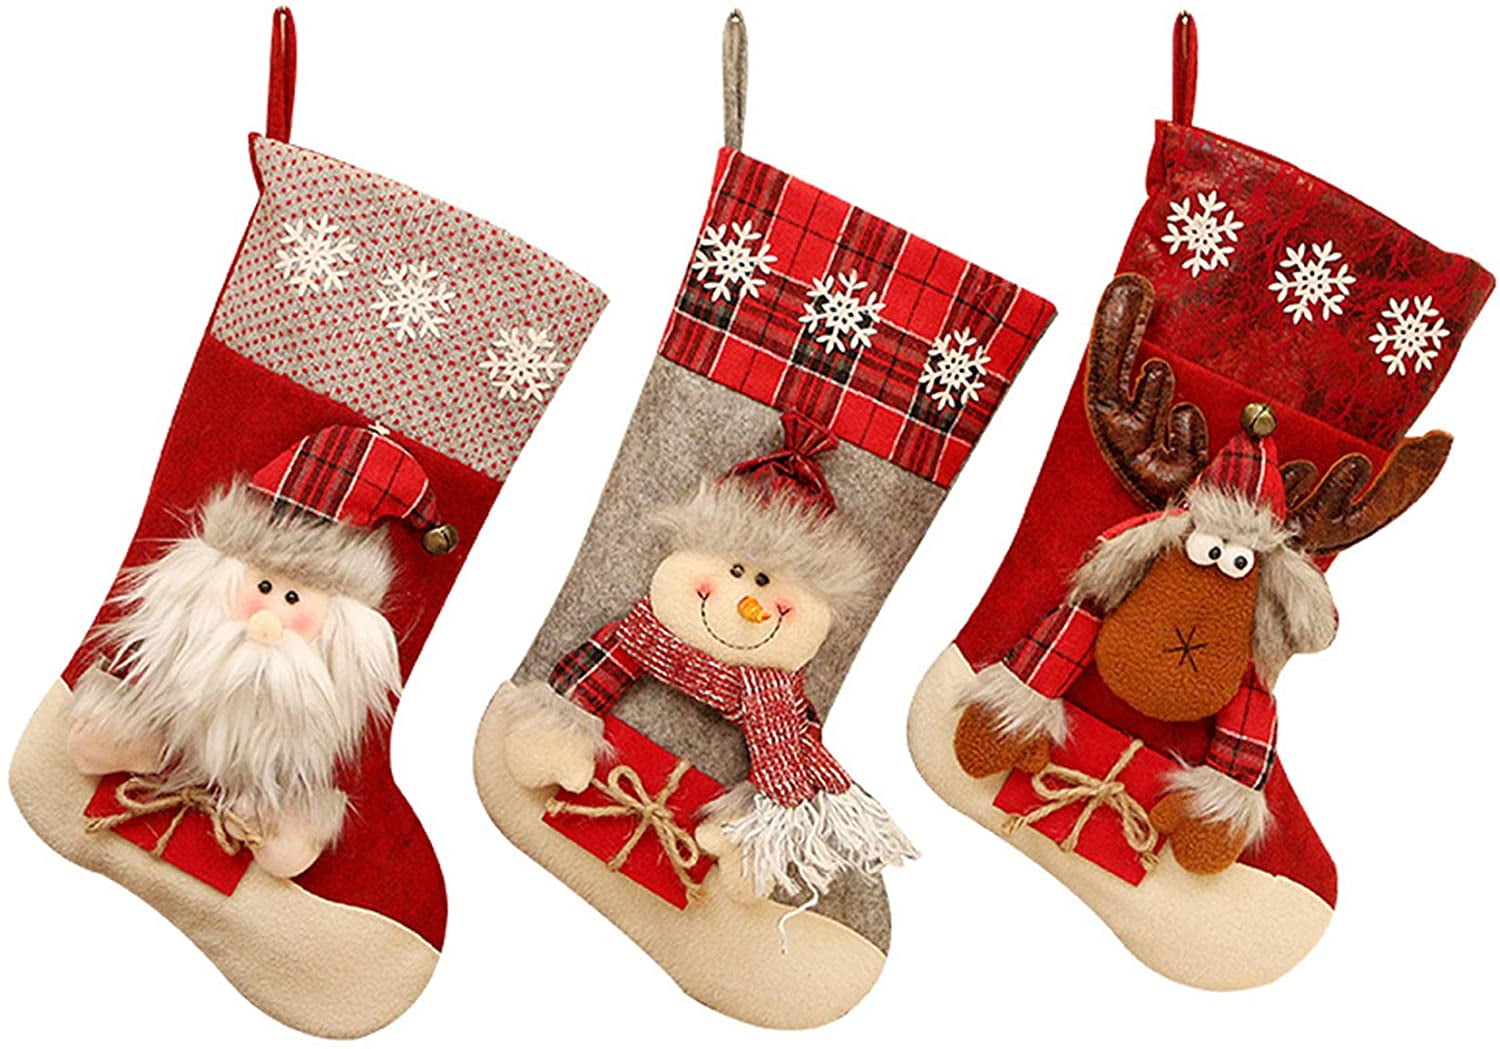 1 Pack-Elk Big Size Christmas Stocking Snowman with for Party Decoration and Party Accessory 18 Classic Christmas Stockings 